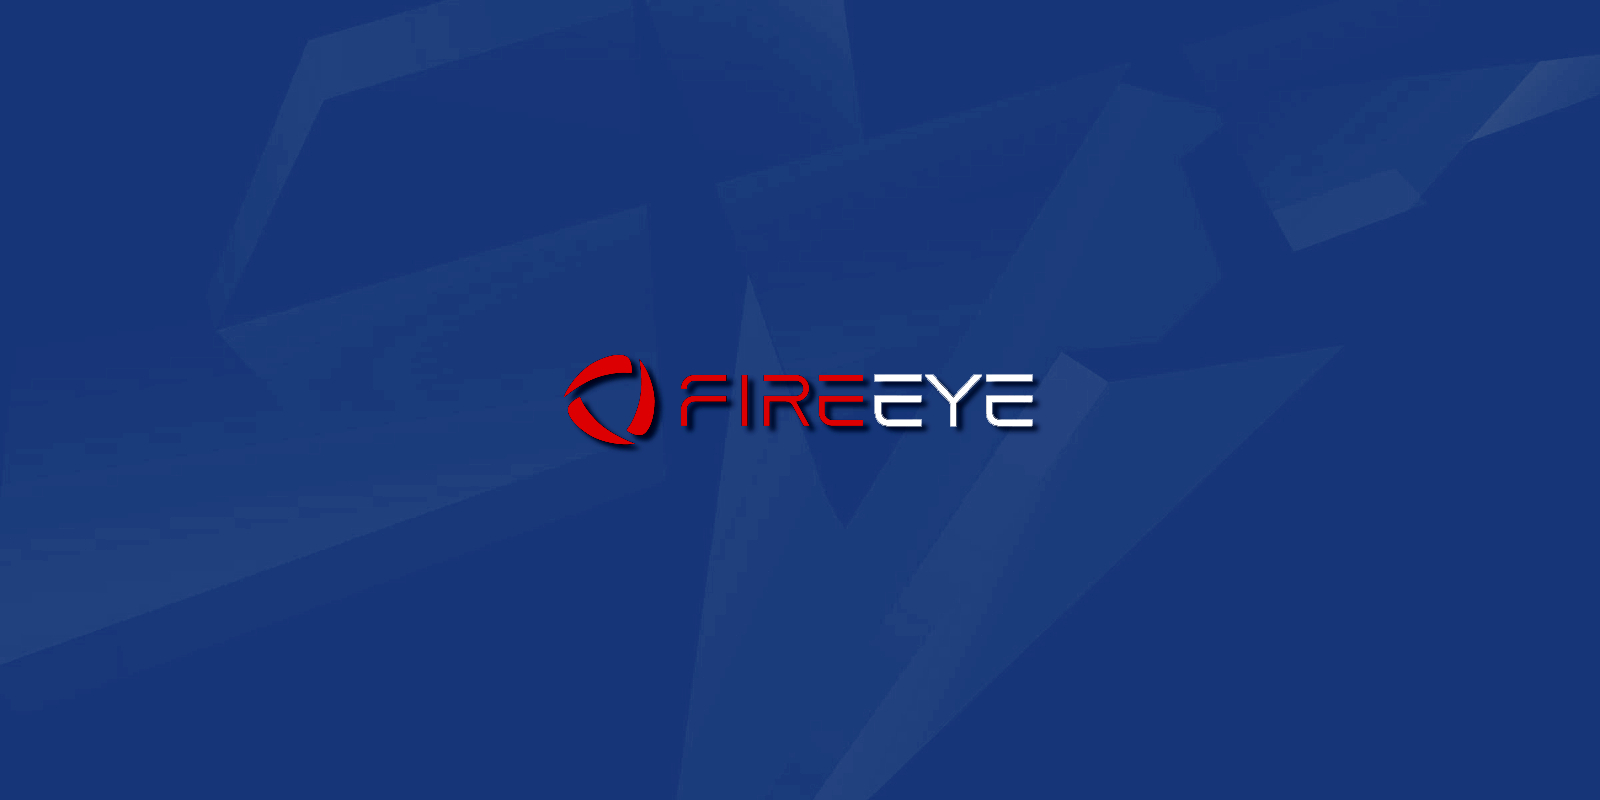 FireEye reveals that it was hacked by a nation state APT group